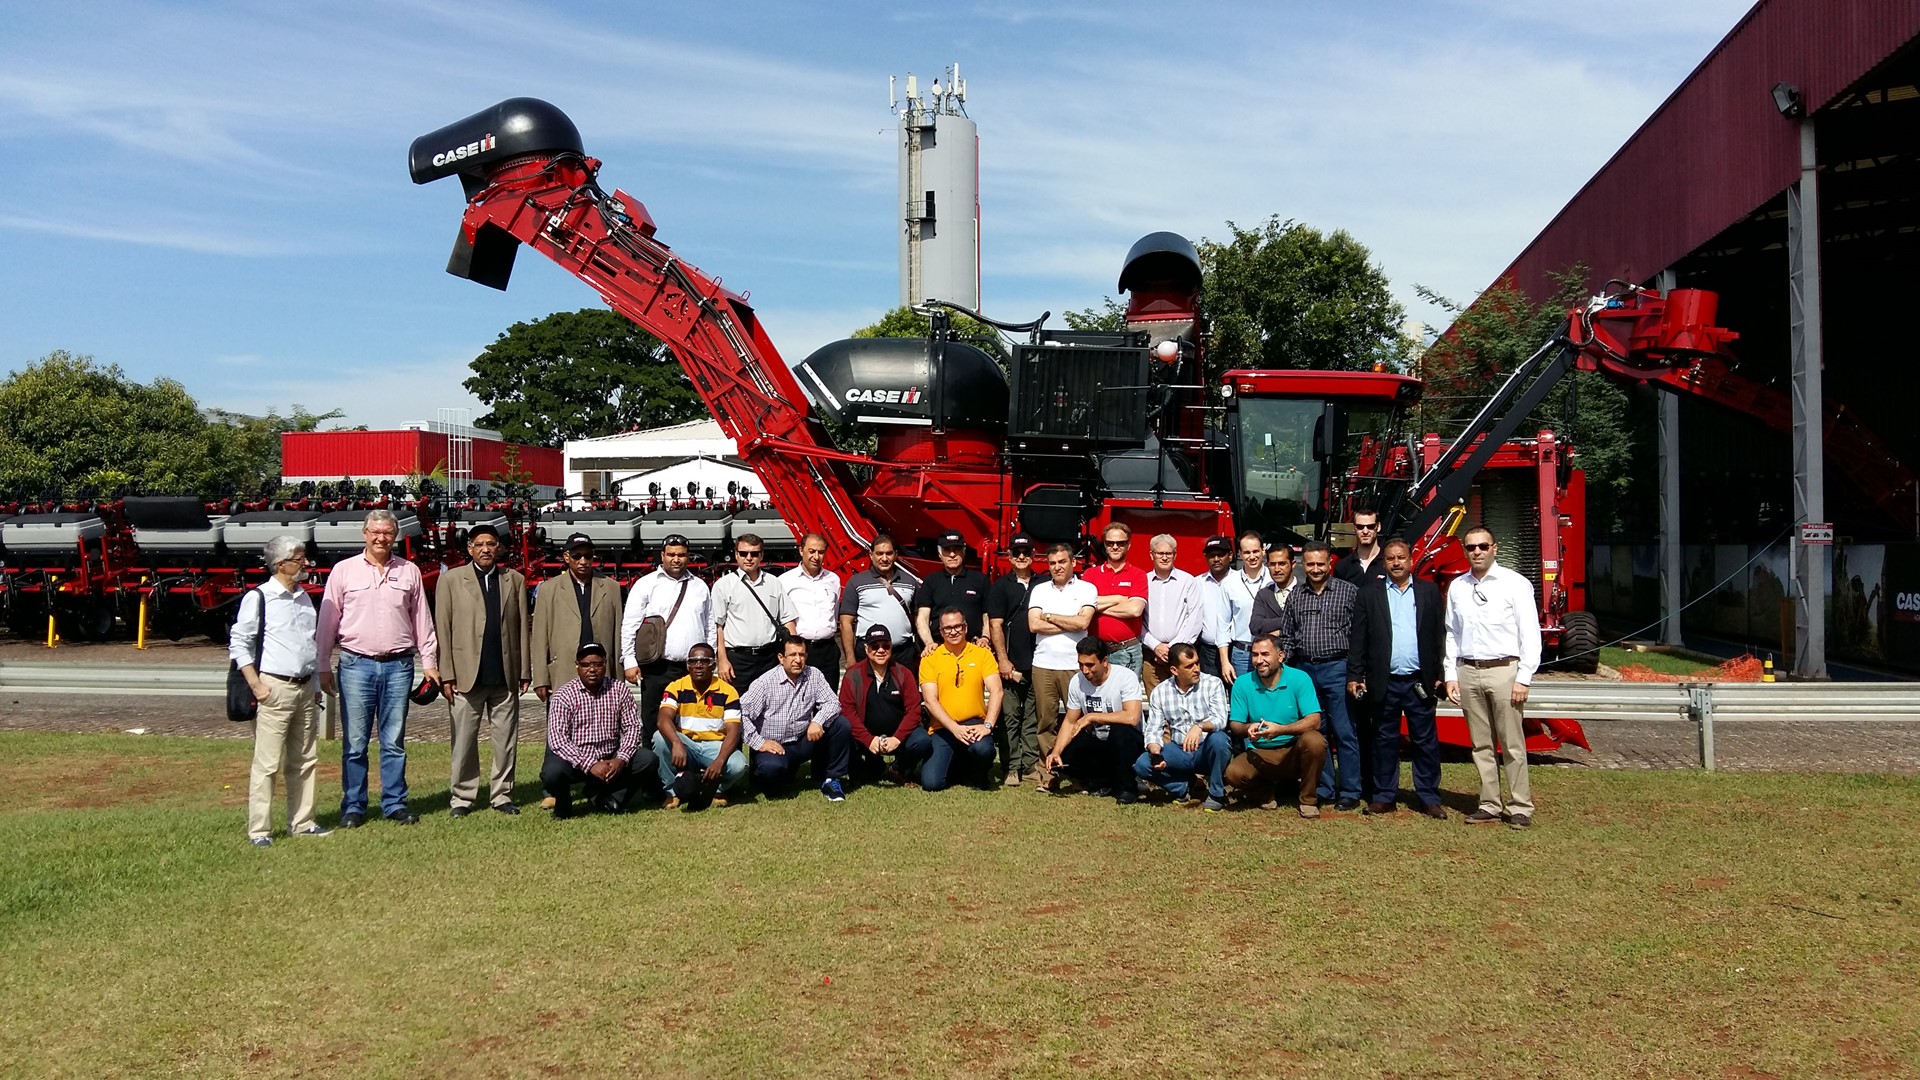 The Case IH Sugar Camp which took place in Brazil for Middle Eastern and African Customers.